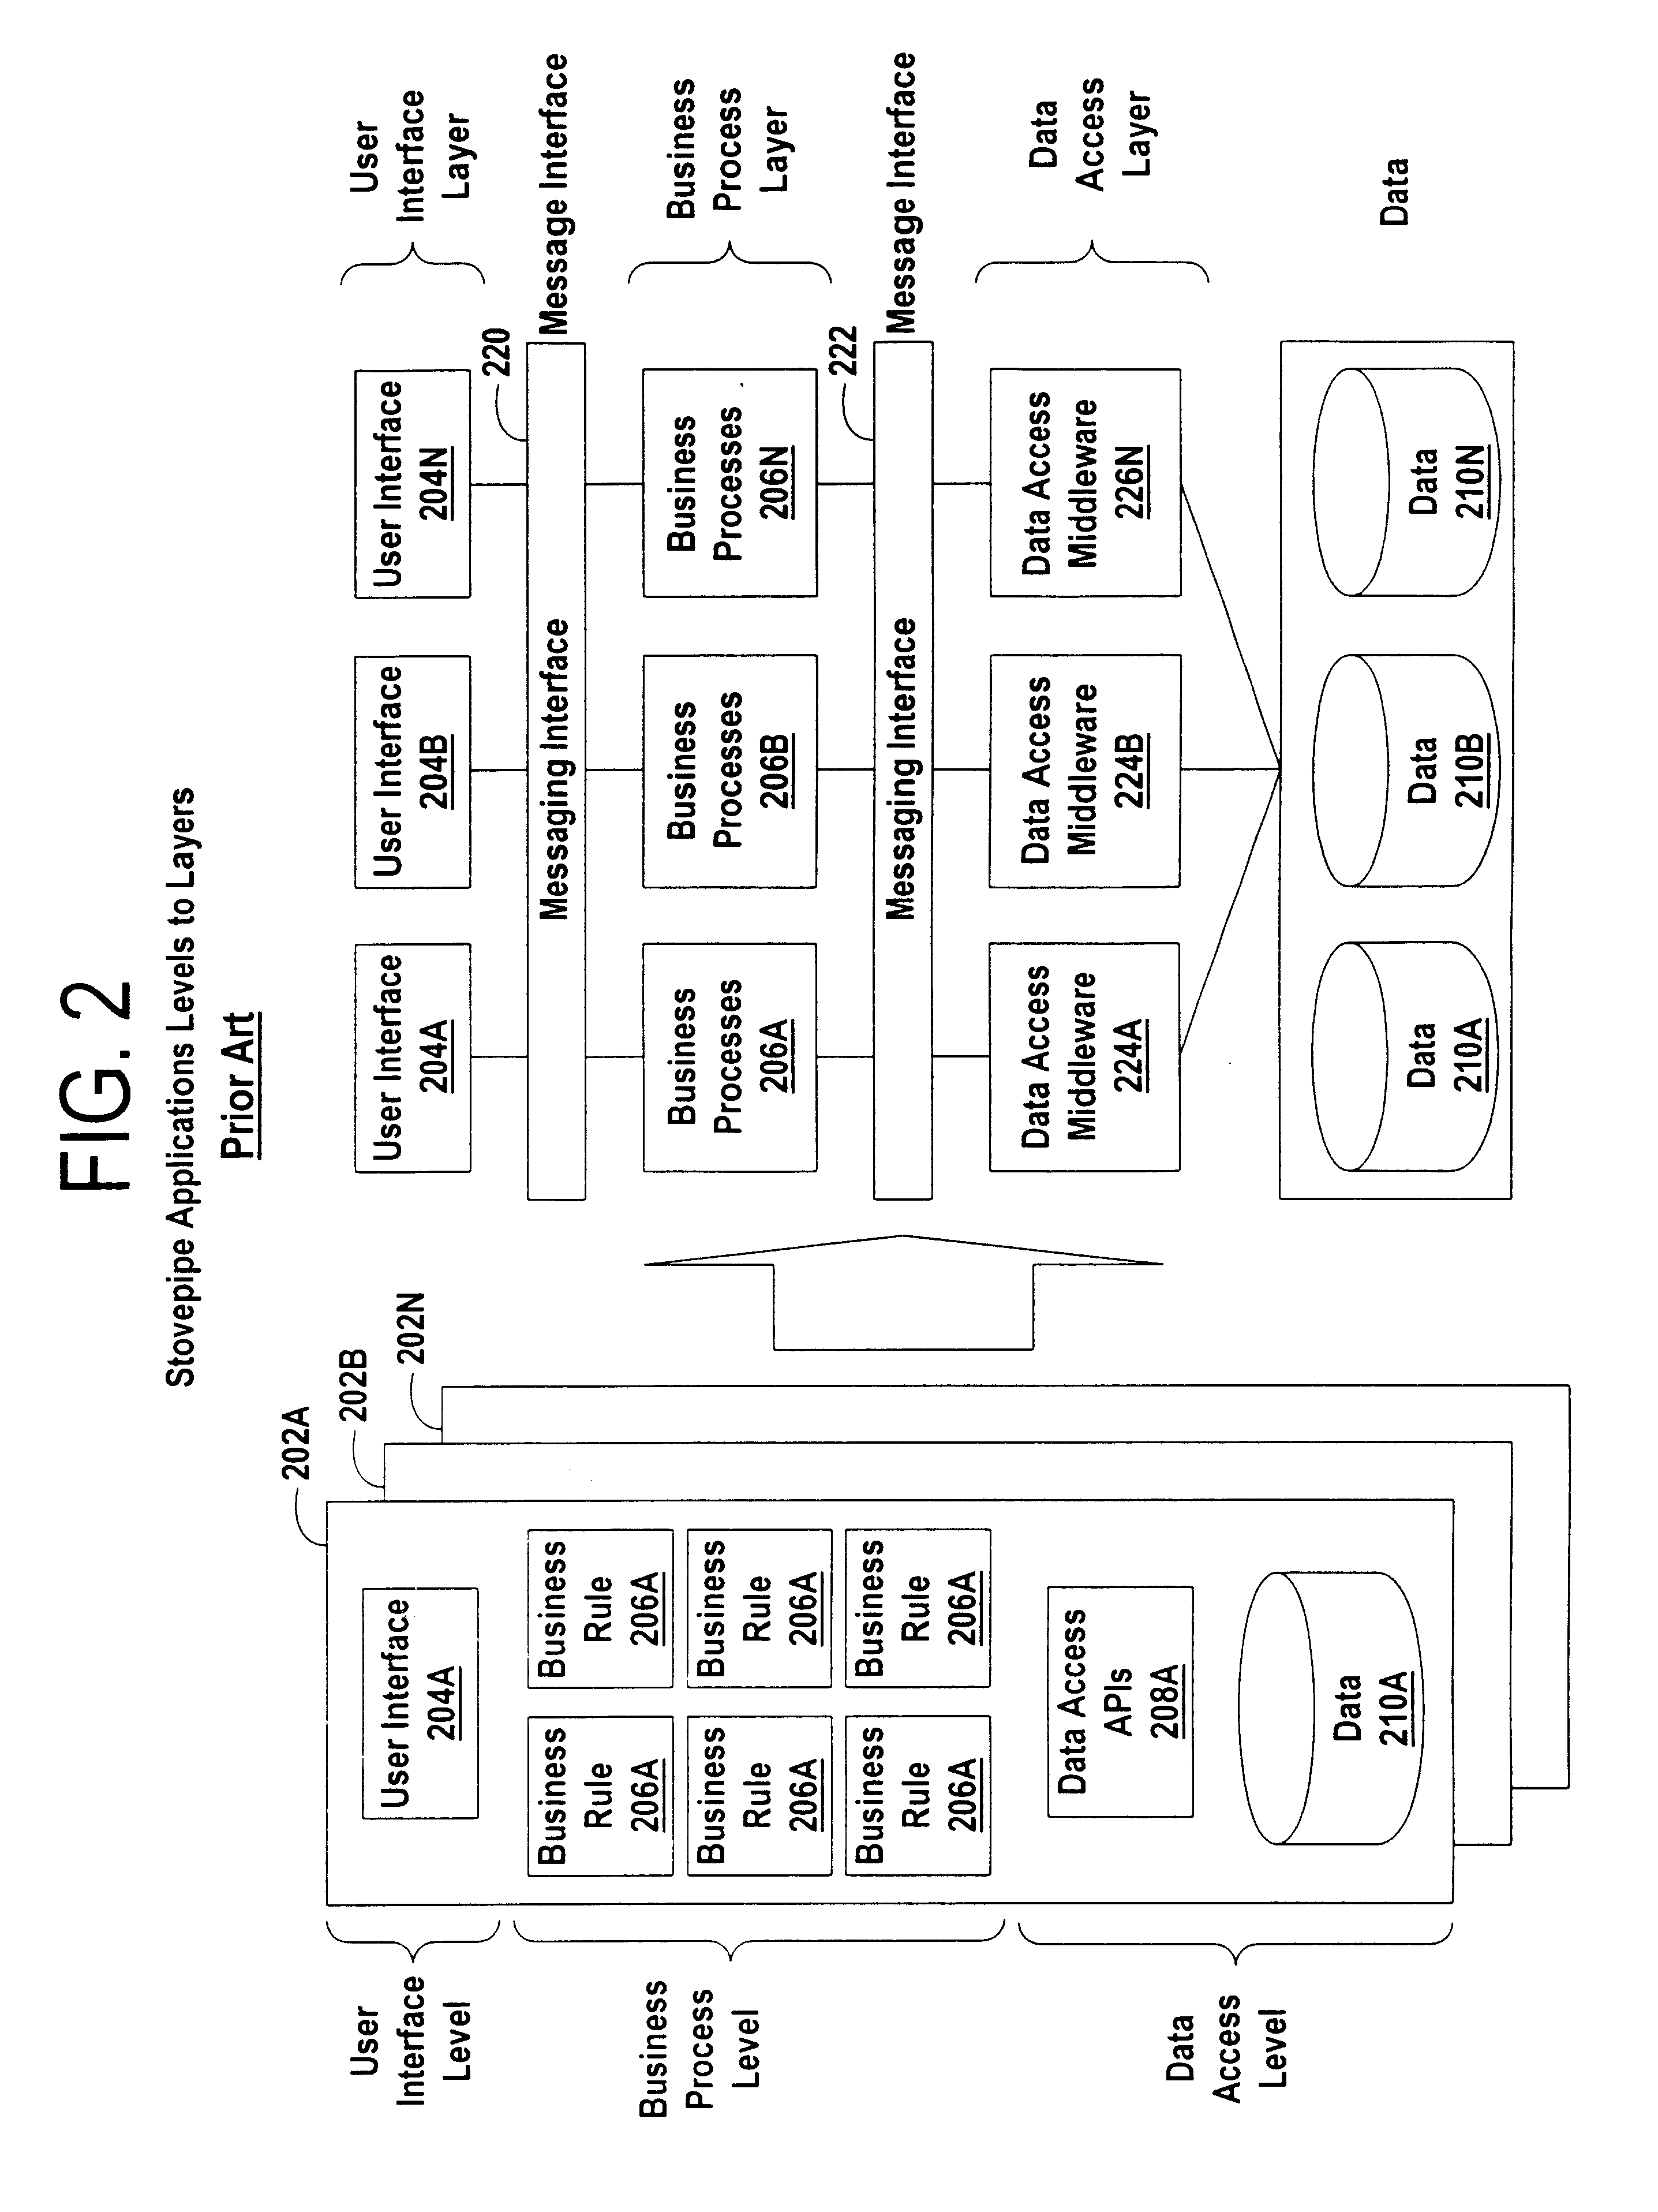 Method and system for implementing a global ecosystem of interrelated services